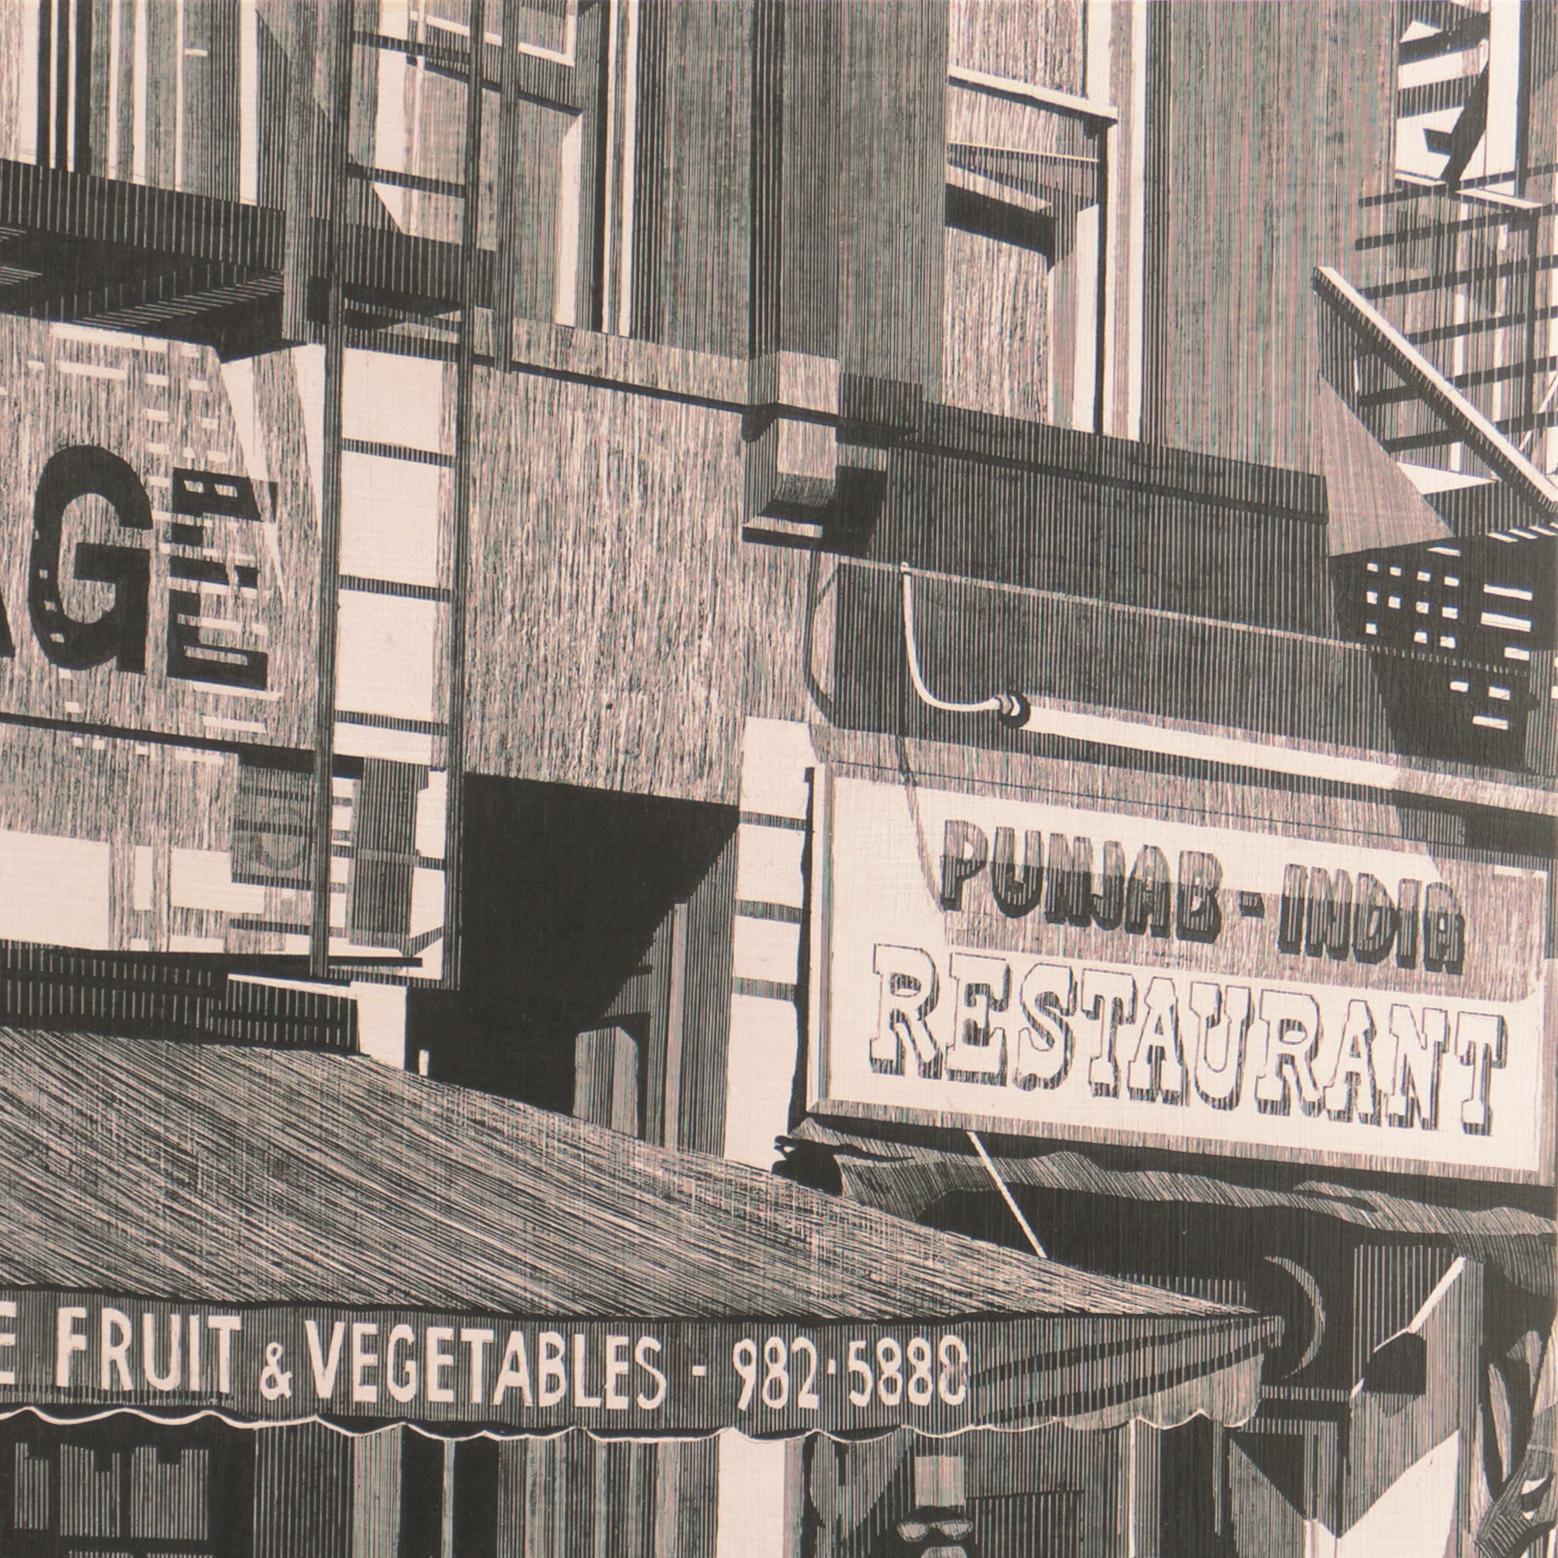 A very large American School diptych showing this vintage Greenwich Village landmark with various pedestrians passing by as an assistant arranges the produce display; a substantial memento of a particular moment in Manhattan history painted in a